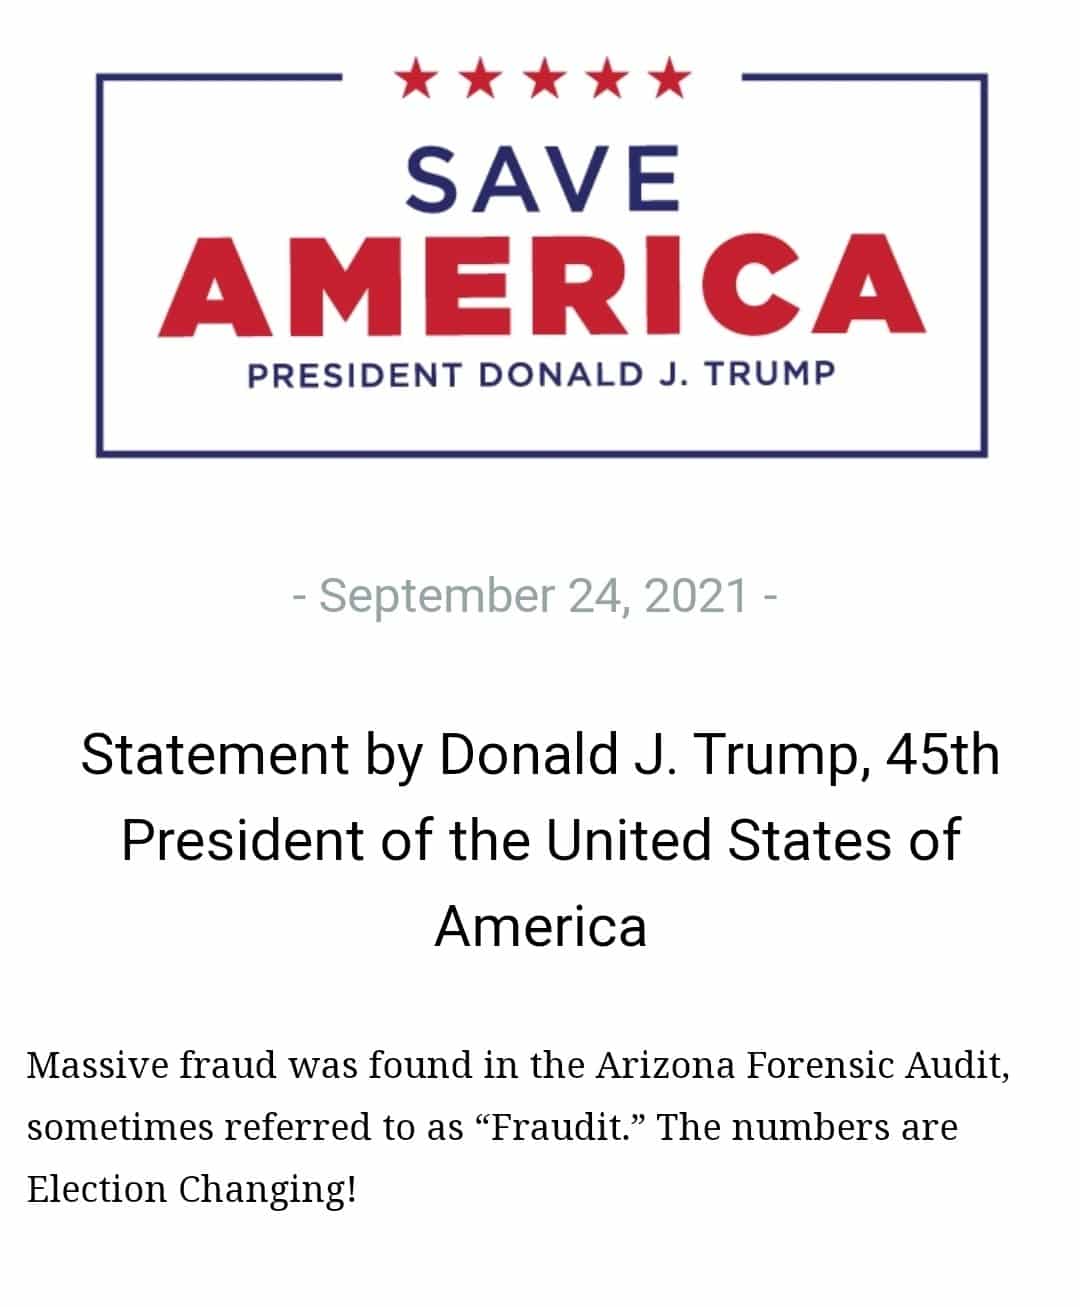 President Donald Trump: “Massive Fraud Was Found In the
Arizona Forensic Audit…The Numbers Are Election Changing” 1